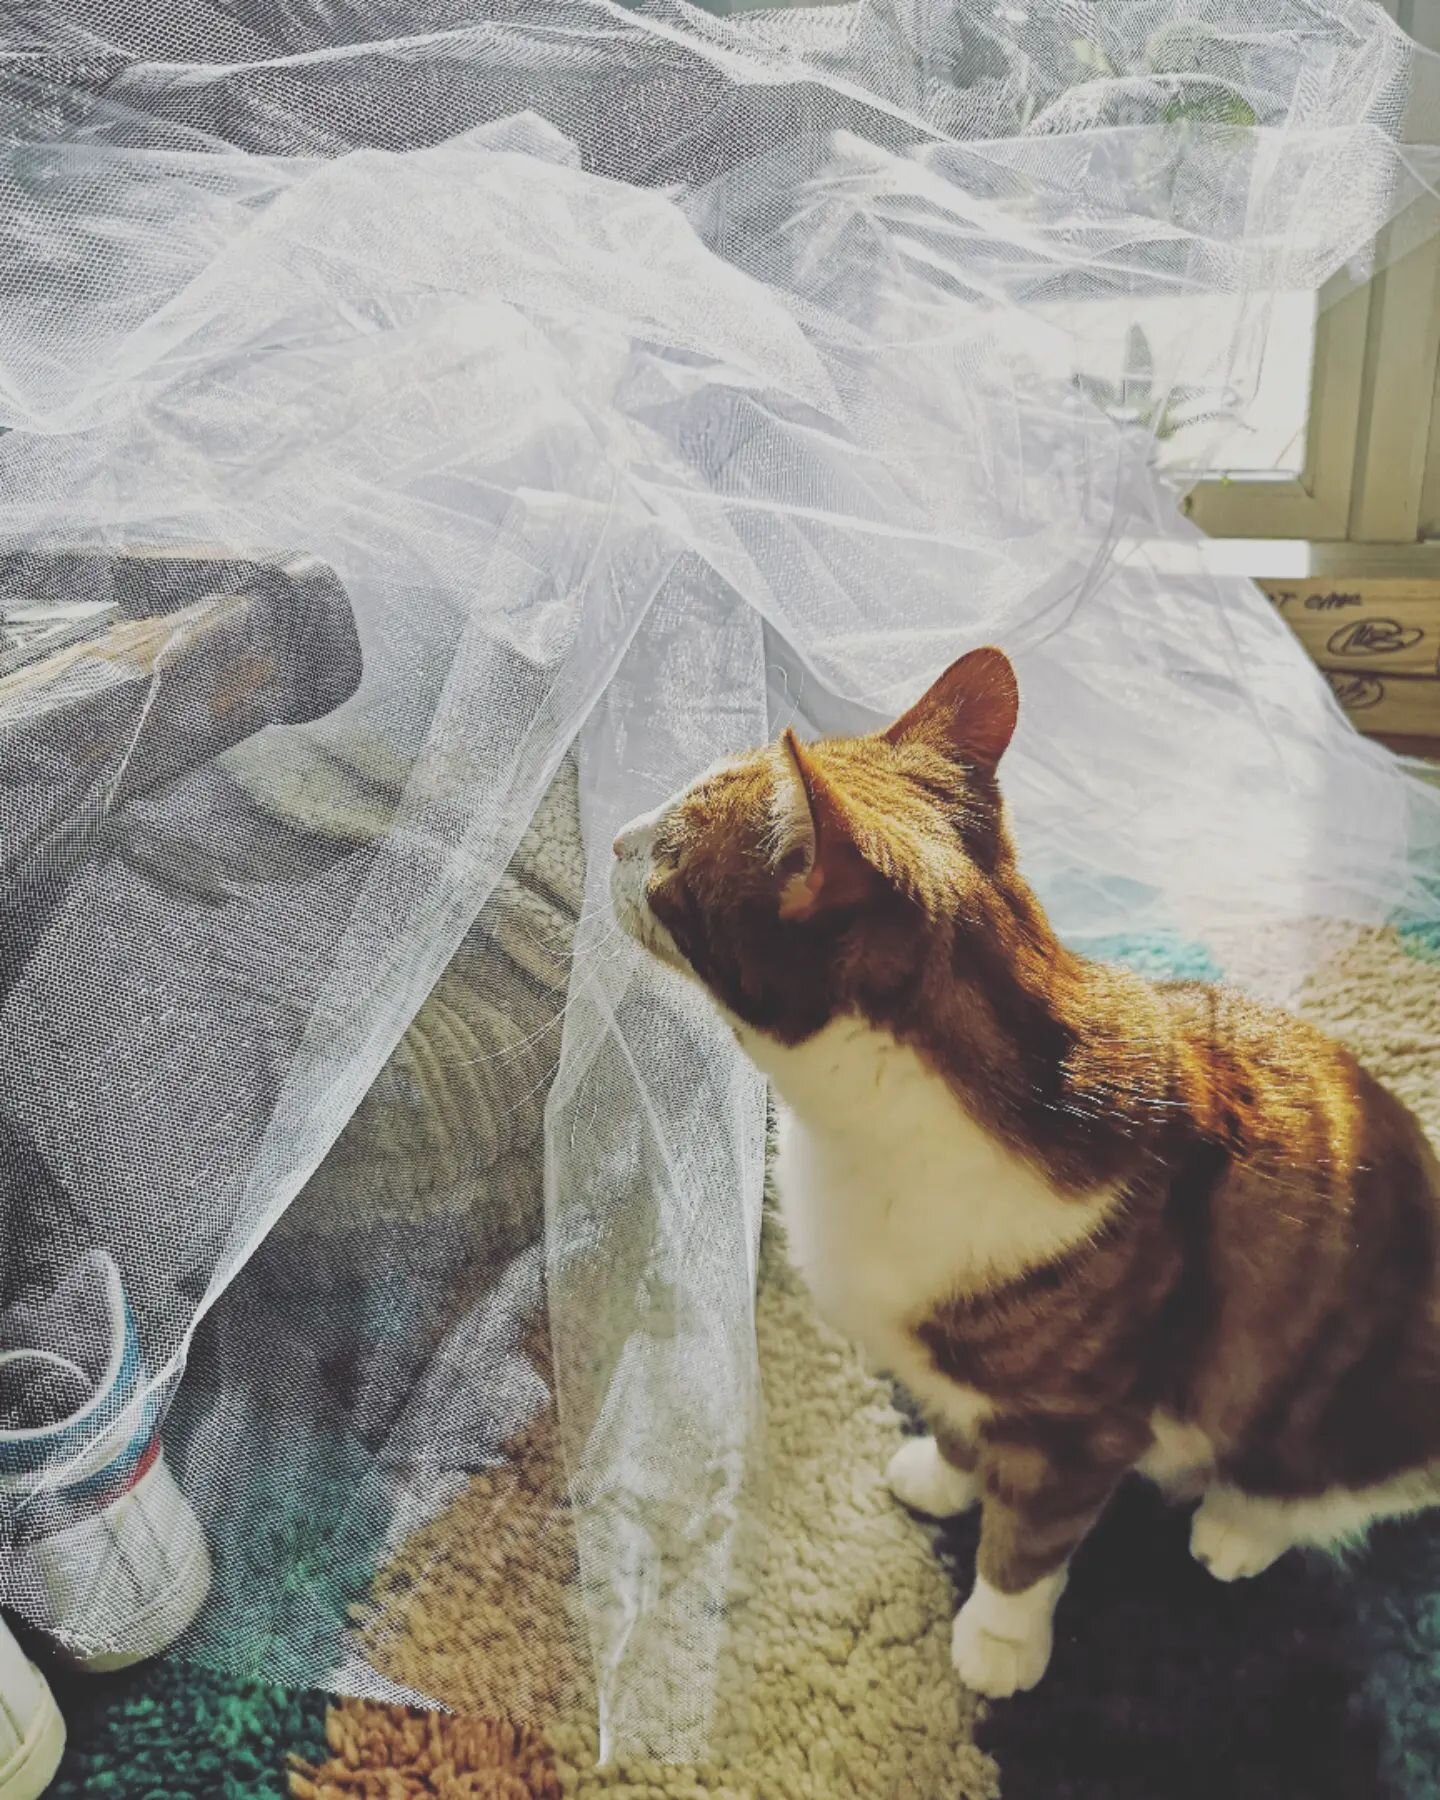 Jesse checking over the tutus for our Easter Showcase which is THIS WEEKEND! Not stressed at all, nope, not me 😅
.
.
.
#show #tutu #catsofinstagram #cats #dancestudio #dancers_and_dance #dance #ballet